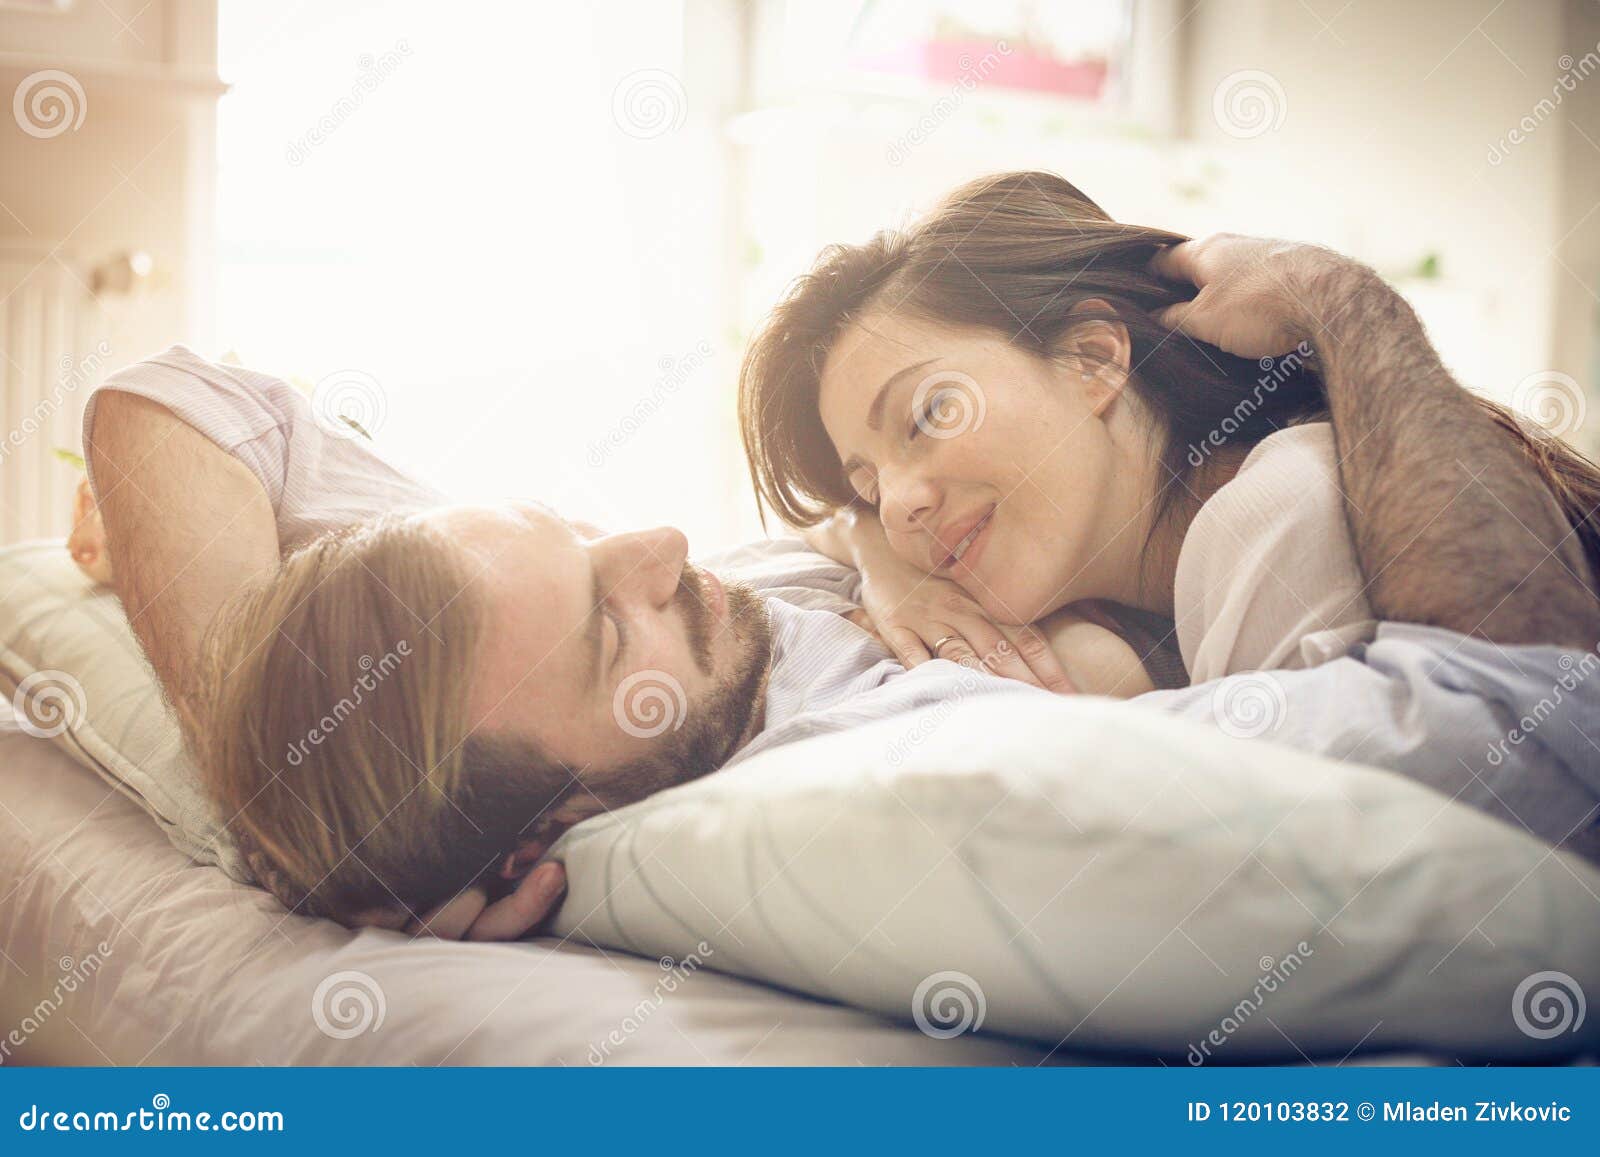 Sweet morning in bed. stock photo. Image of female, happiness ...